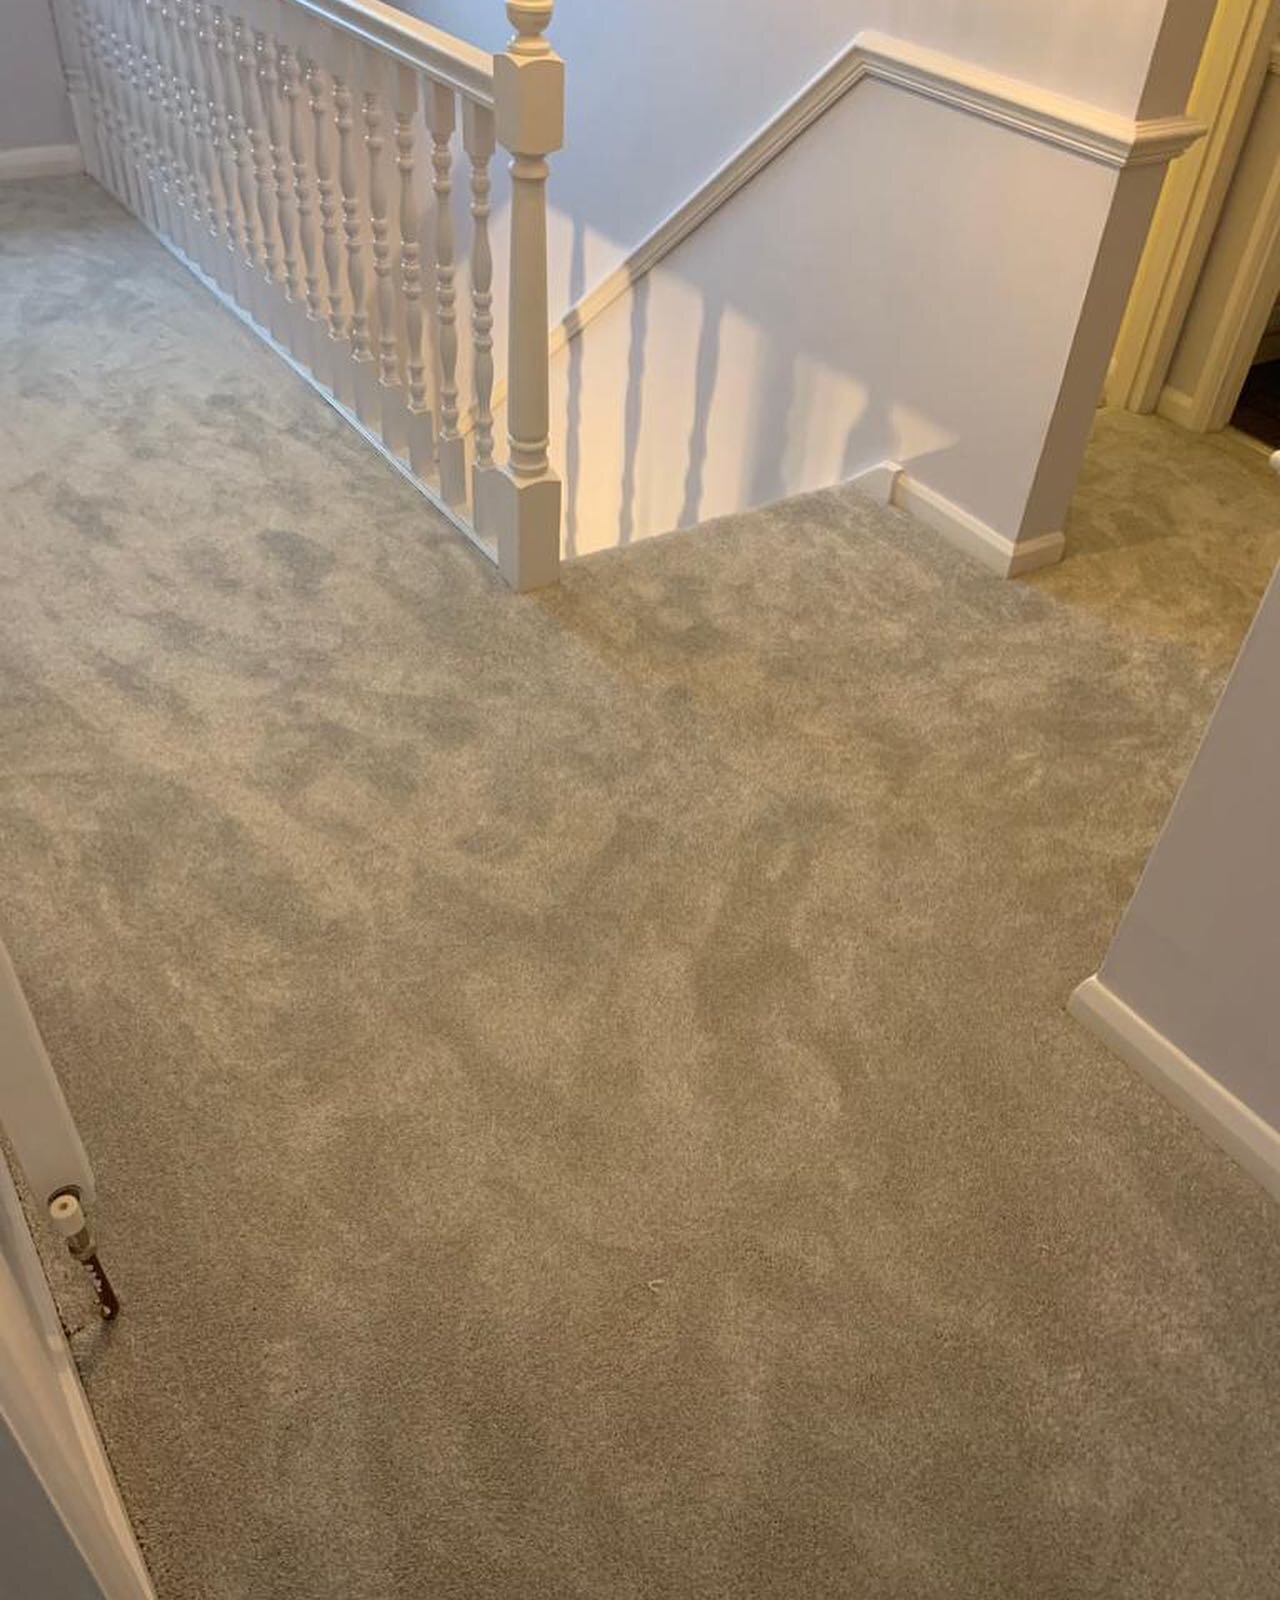 Inglewood Saxony Carpet by @cormarcarpets in colour &lsquo;Winter Ice&rsquo; supplied and installed on this stairs and landing.

Get in touch for an appointment at our showroom or the comfort of your own home. We provide a free measuring service and 